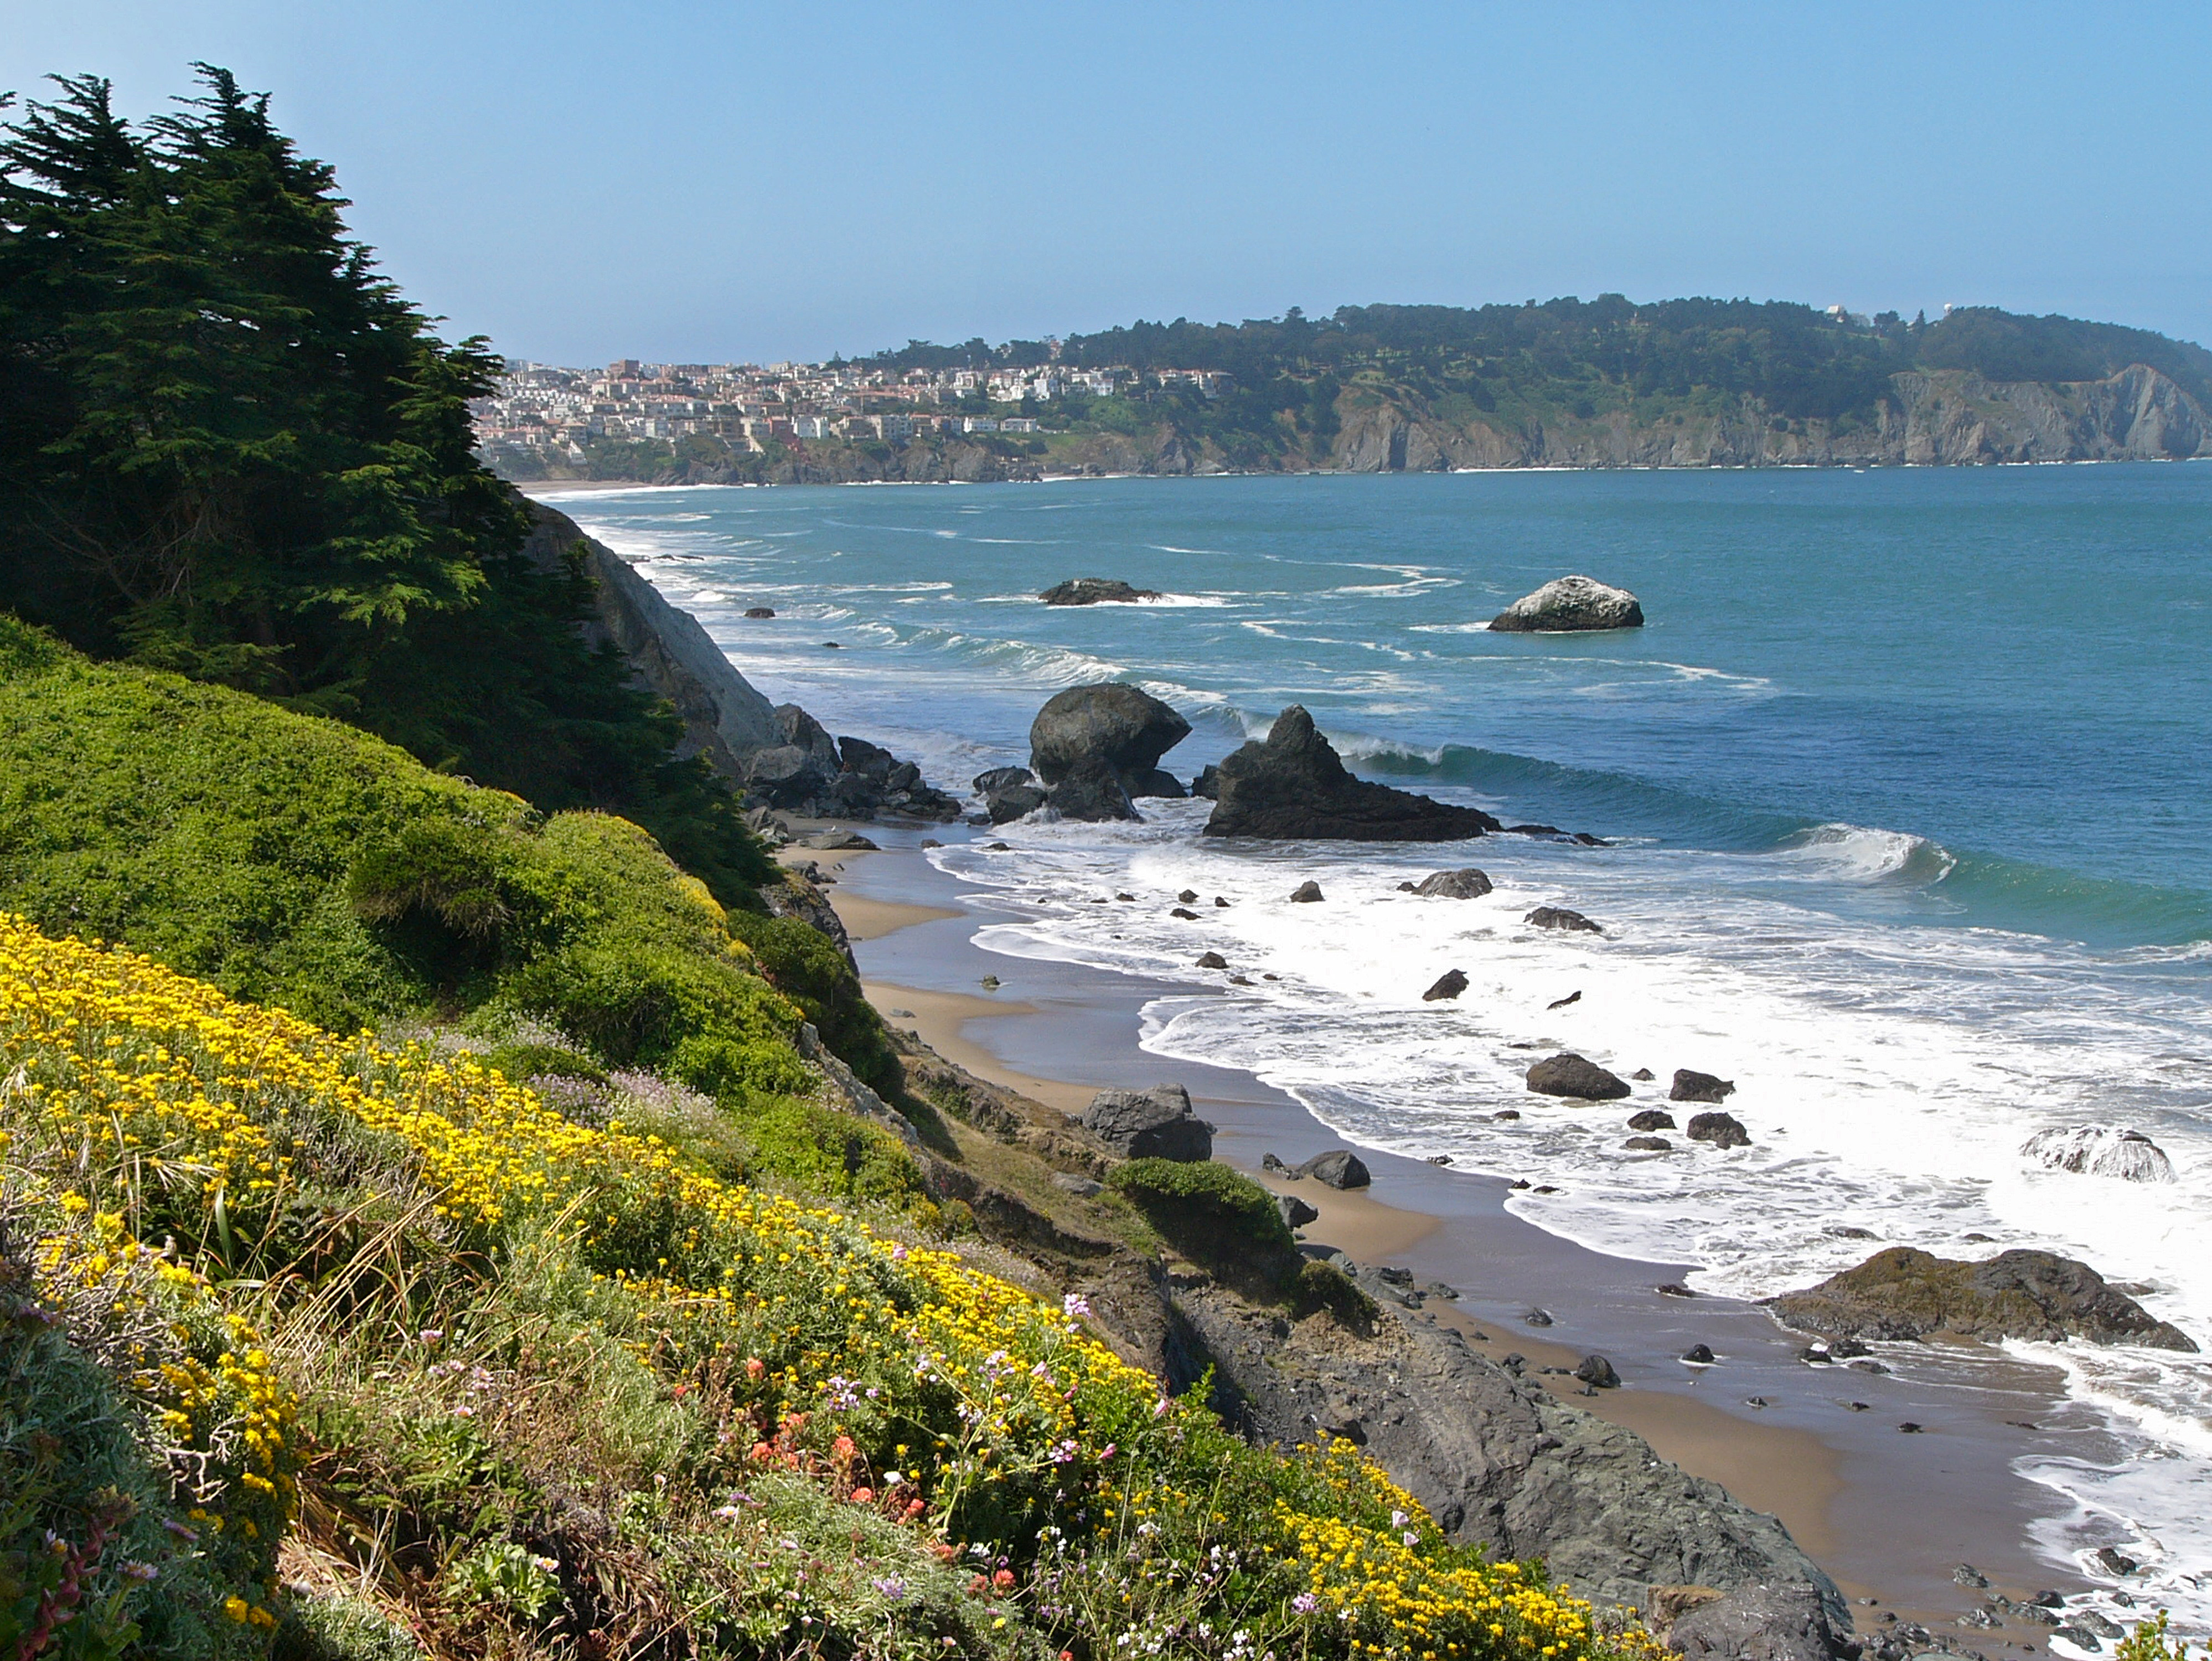 Rocky bluffs above the blue ocean covered with yellow flowers in the foreground and and trees.